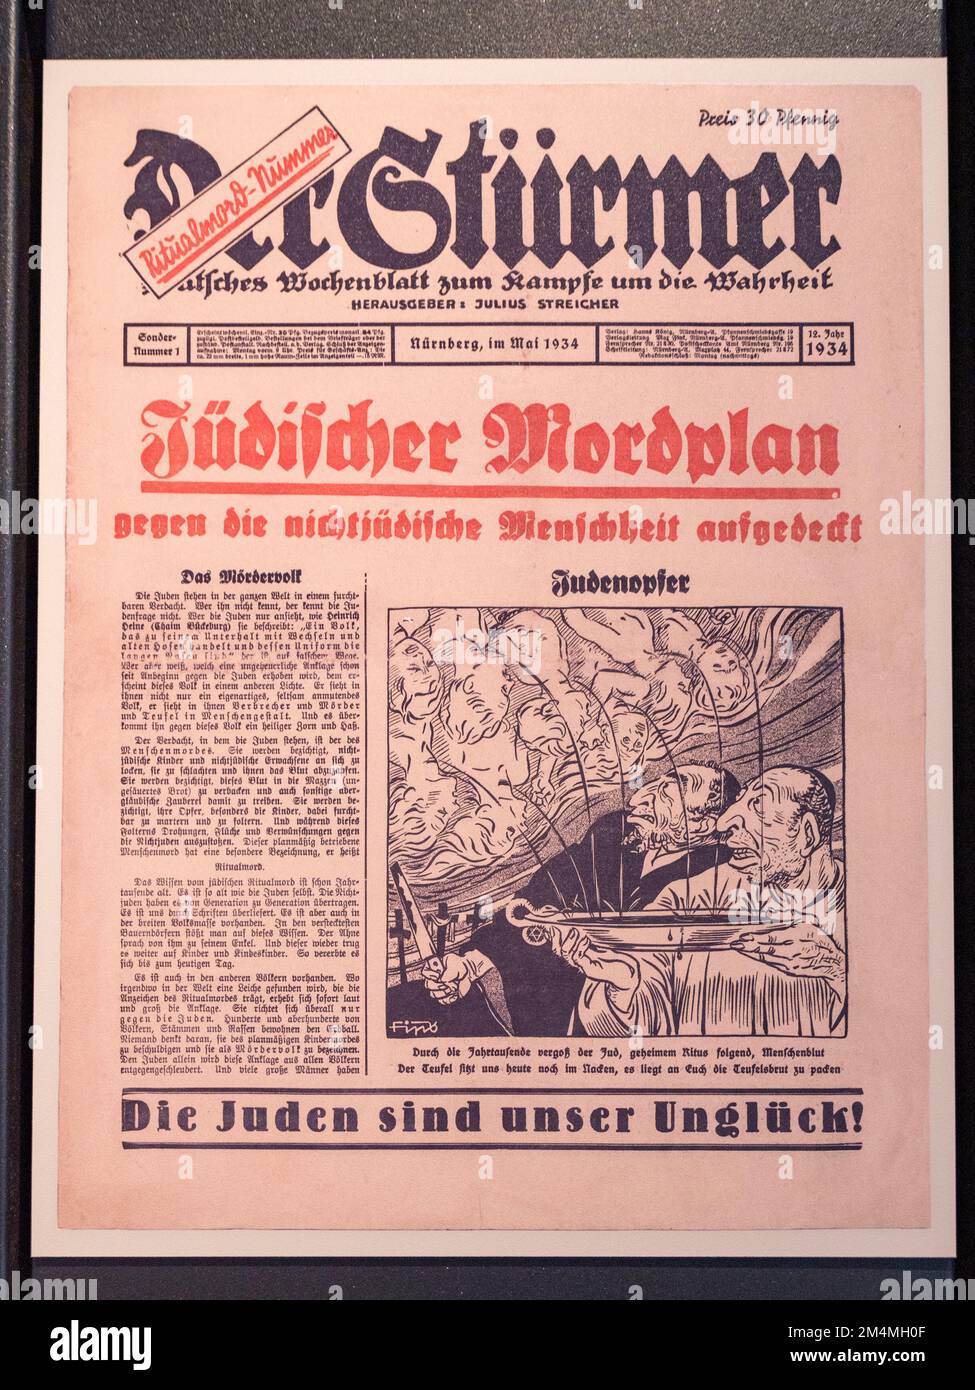 'Der Stürmer' (The Striker') with anti-semitic front page in May 1934 a weekly German tabloid-format, Imperial War Museum, London, UK. Stock Photo